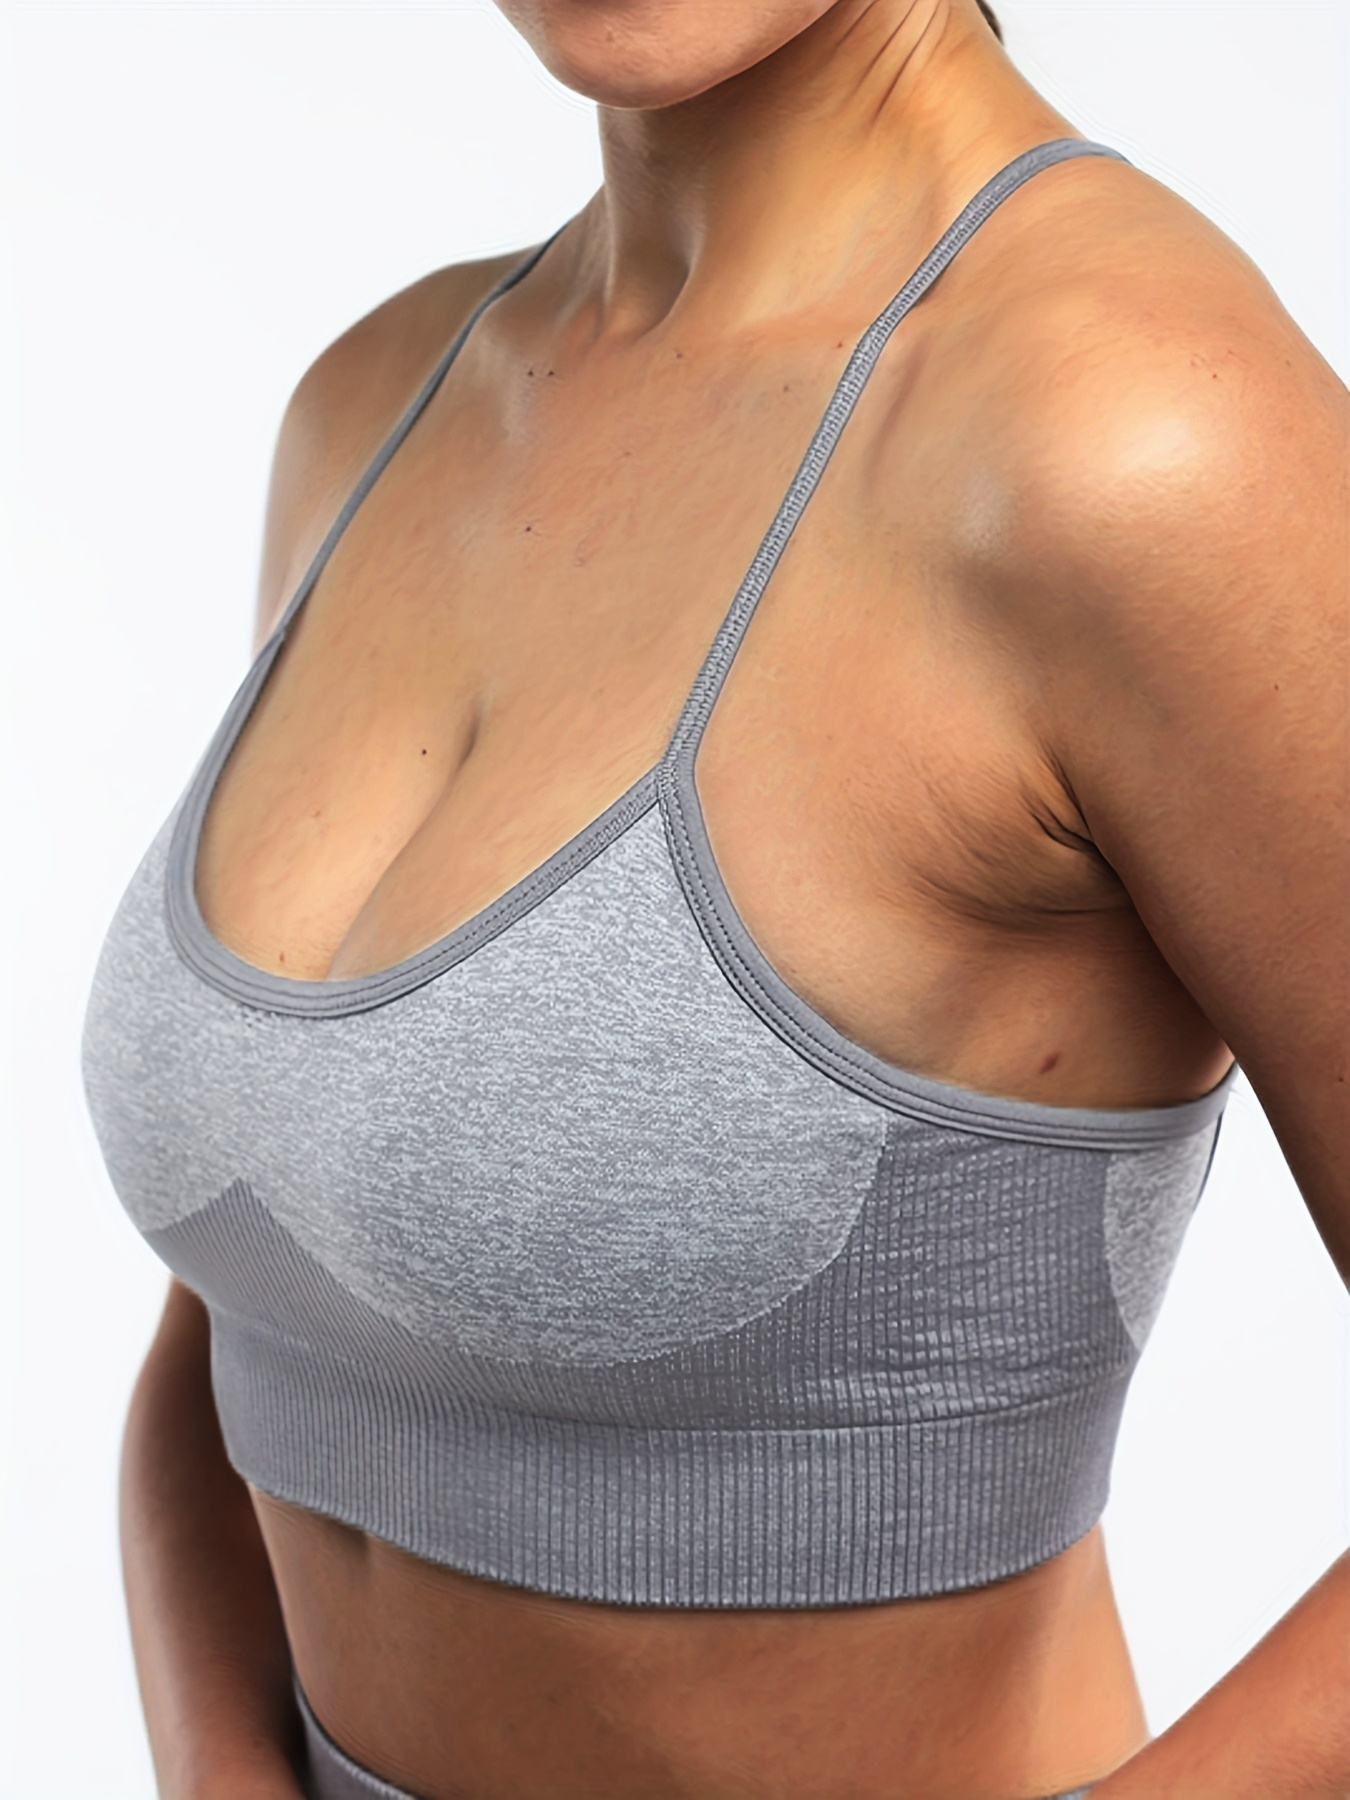 Women's Activewear: Seamless Double Strap Sports Bra with Criss-Cross Back  for Sexy Yoga Fitness Workouts